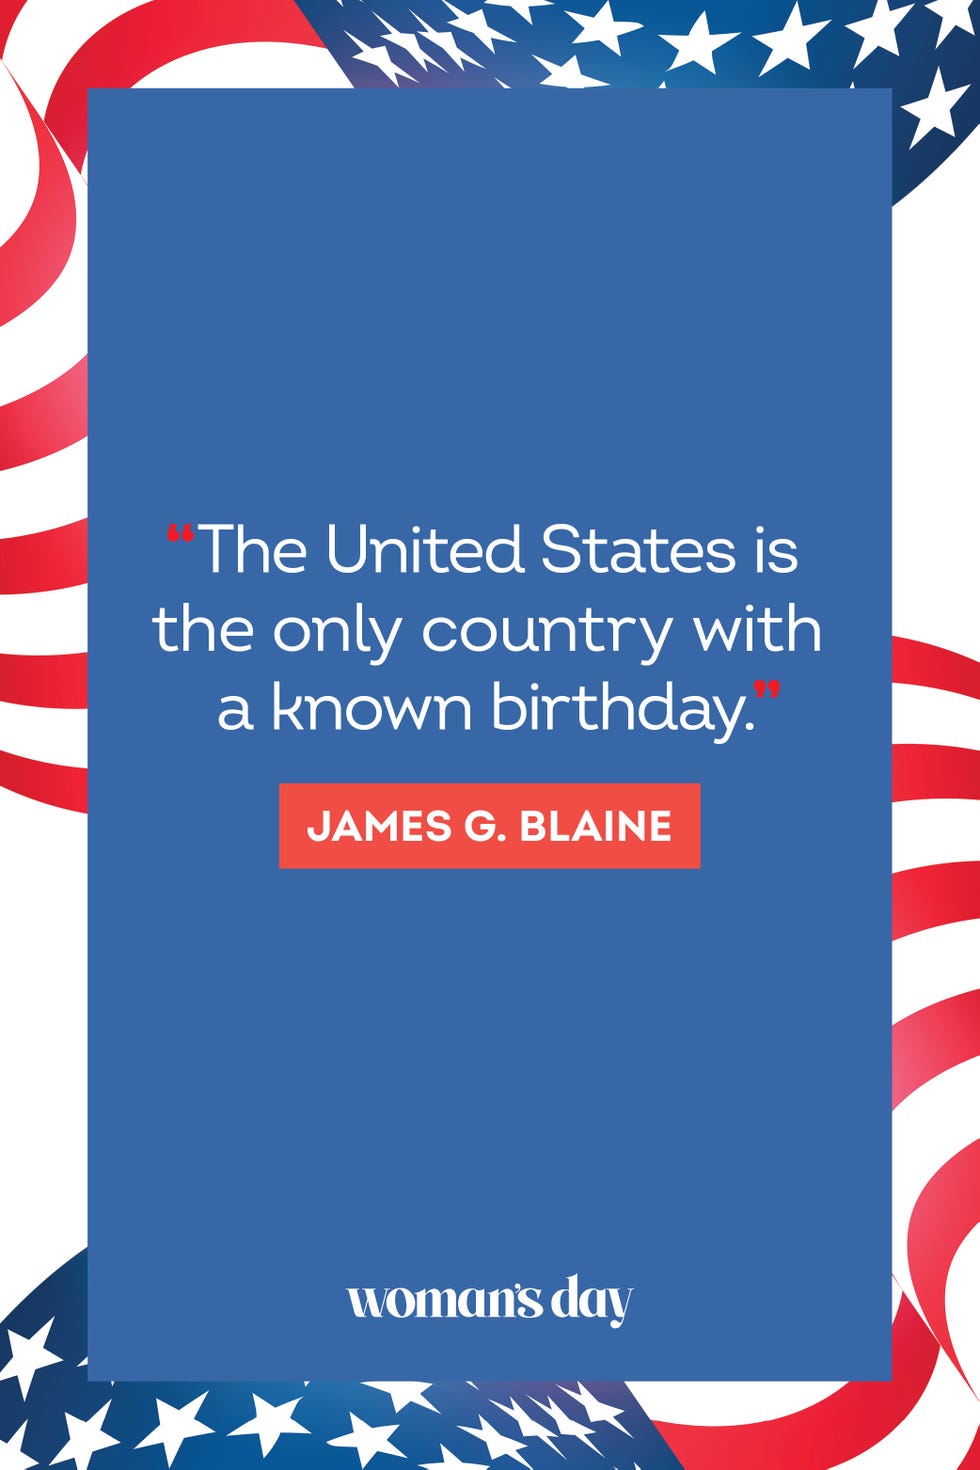 4th of july quotes james g blaine